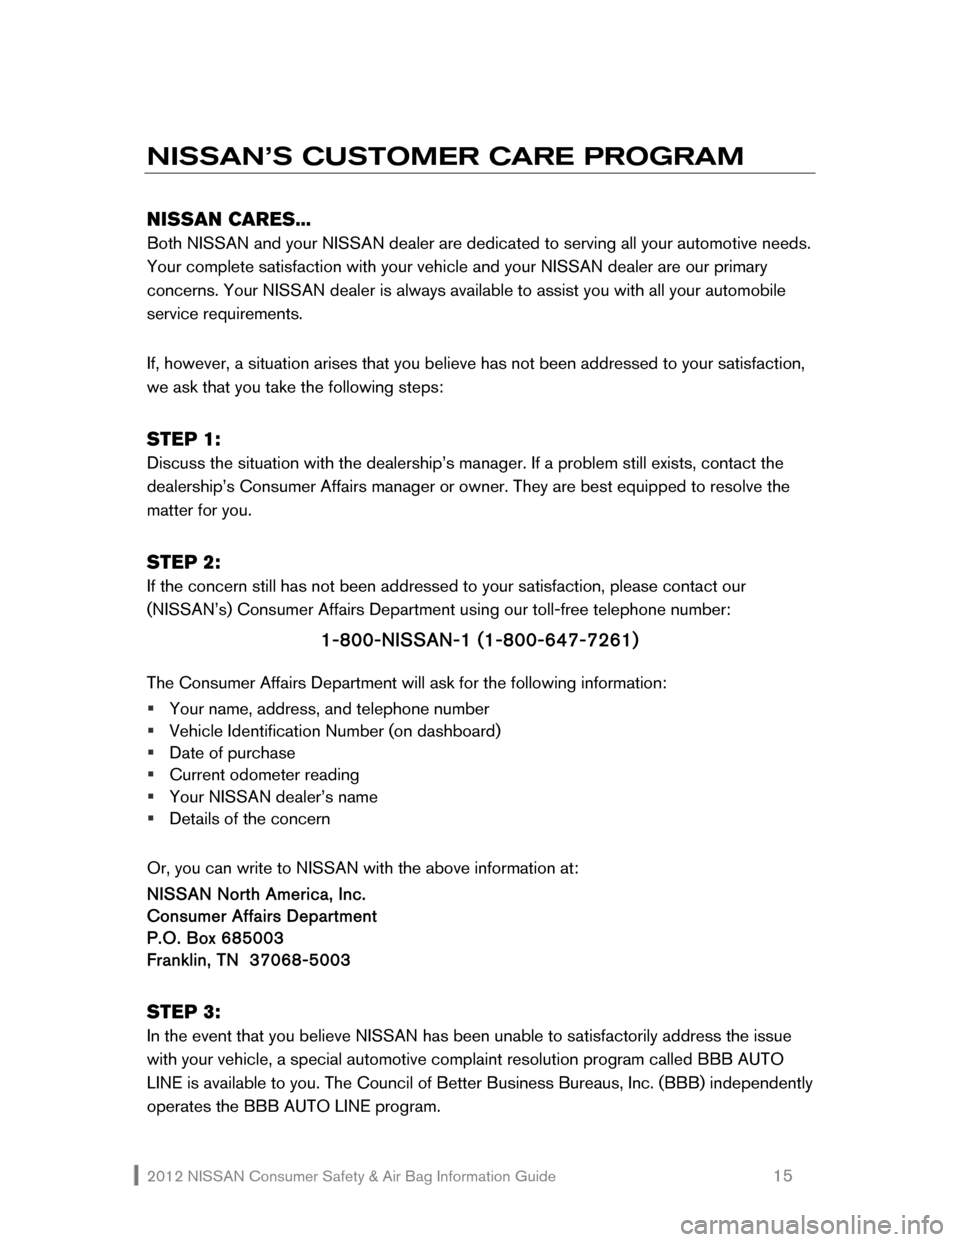 NISSAN 370Z ROADSTER 2012 Z34 Consumer Safety Air Bag Information Guide 2012 NISSAN Consumer Safety & Air Bag Information Guide                                                   15 
NISSAN’S CUSTOMER CARE PROGRAM 
 
NISSAN CARES... 
Both NISSAN and your NISSAN dealer ar